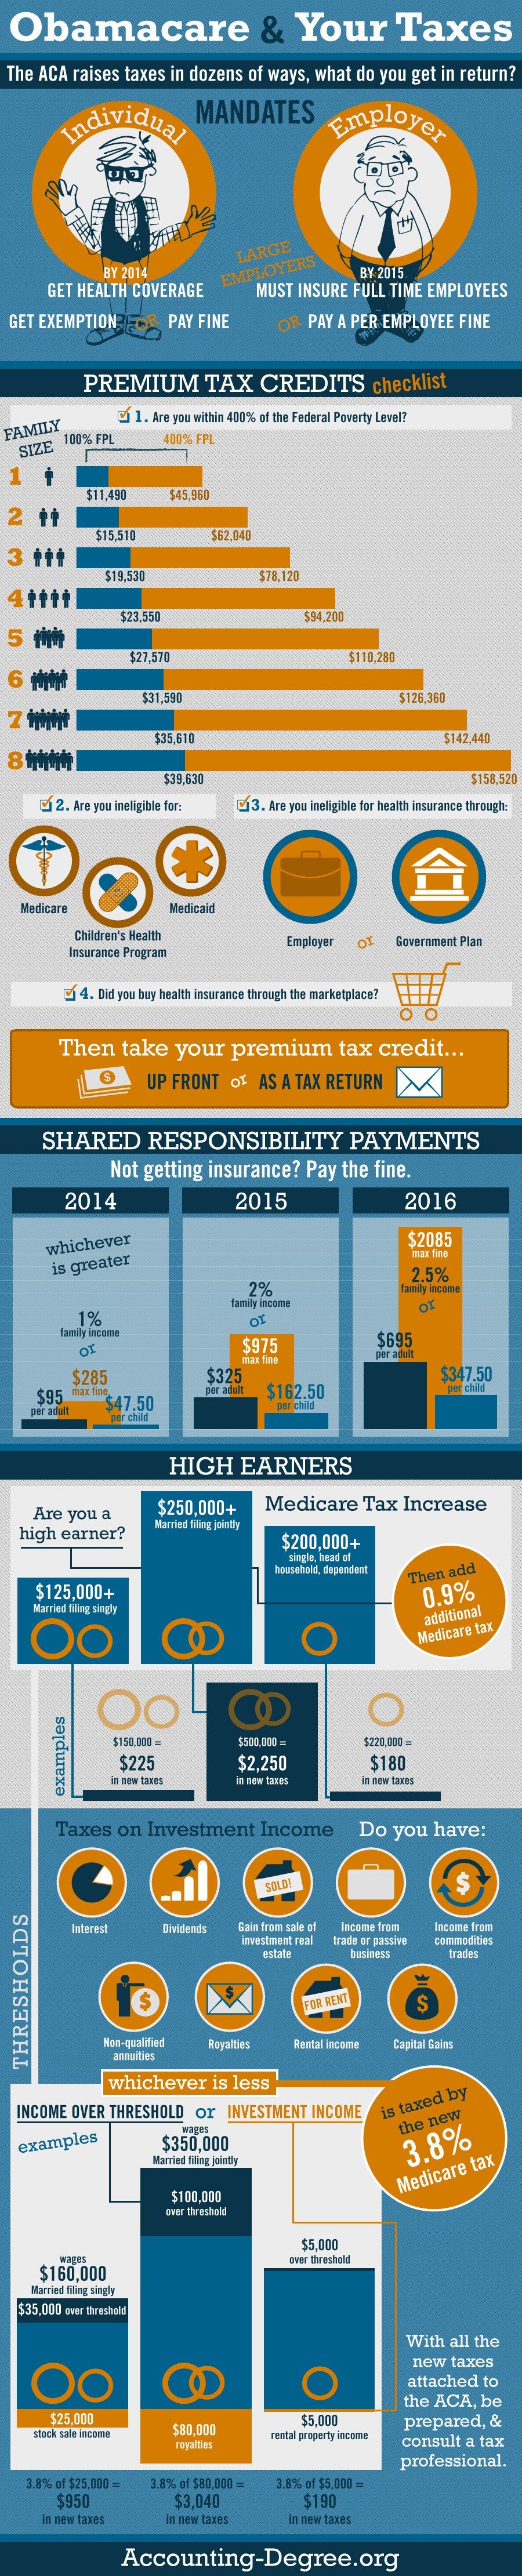 ObamaCare and Taxes: What You Should Know Infographic